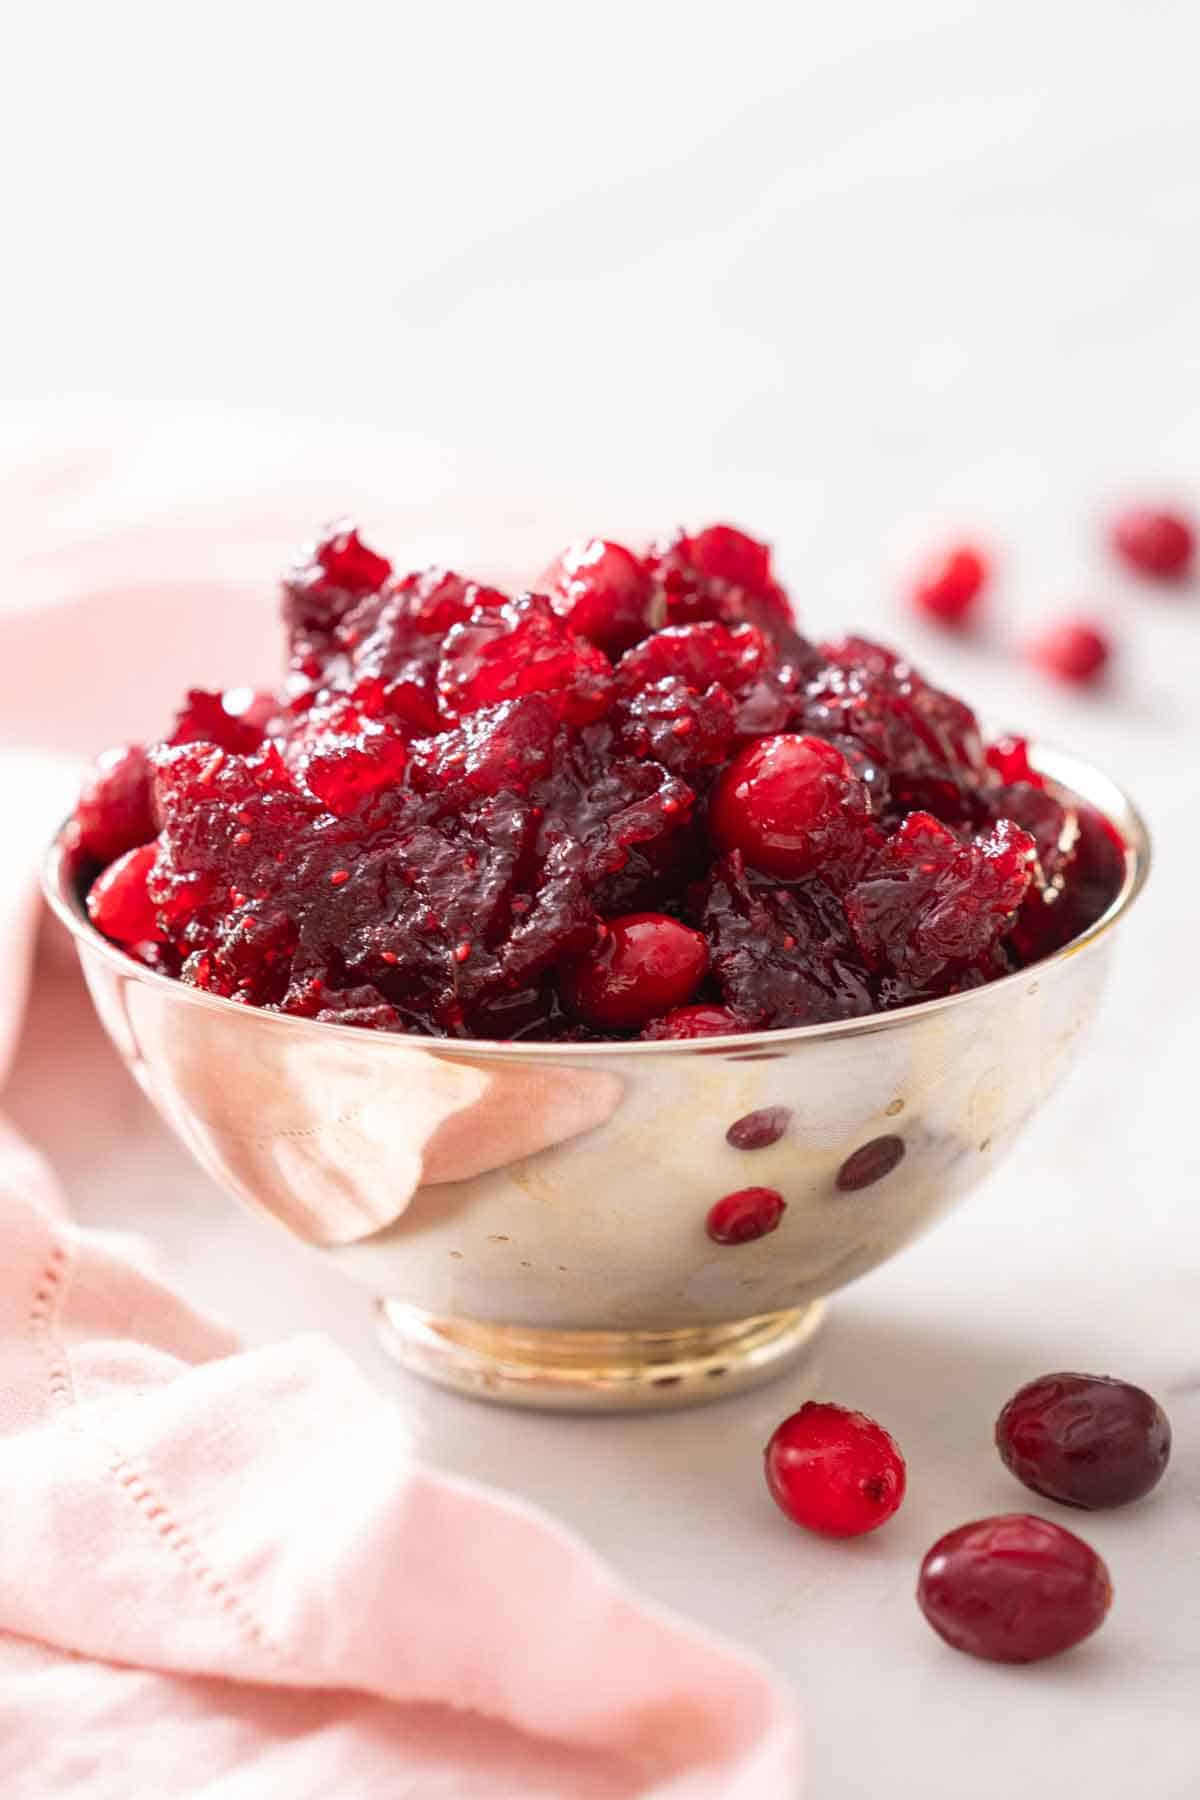 A profile view of a bowl of cranberry sauce with some cranberries scattered around.